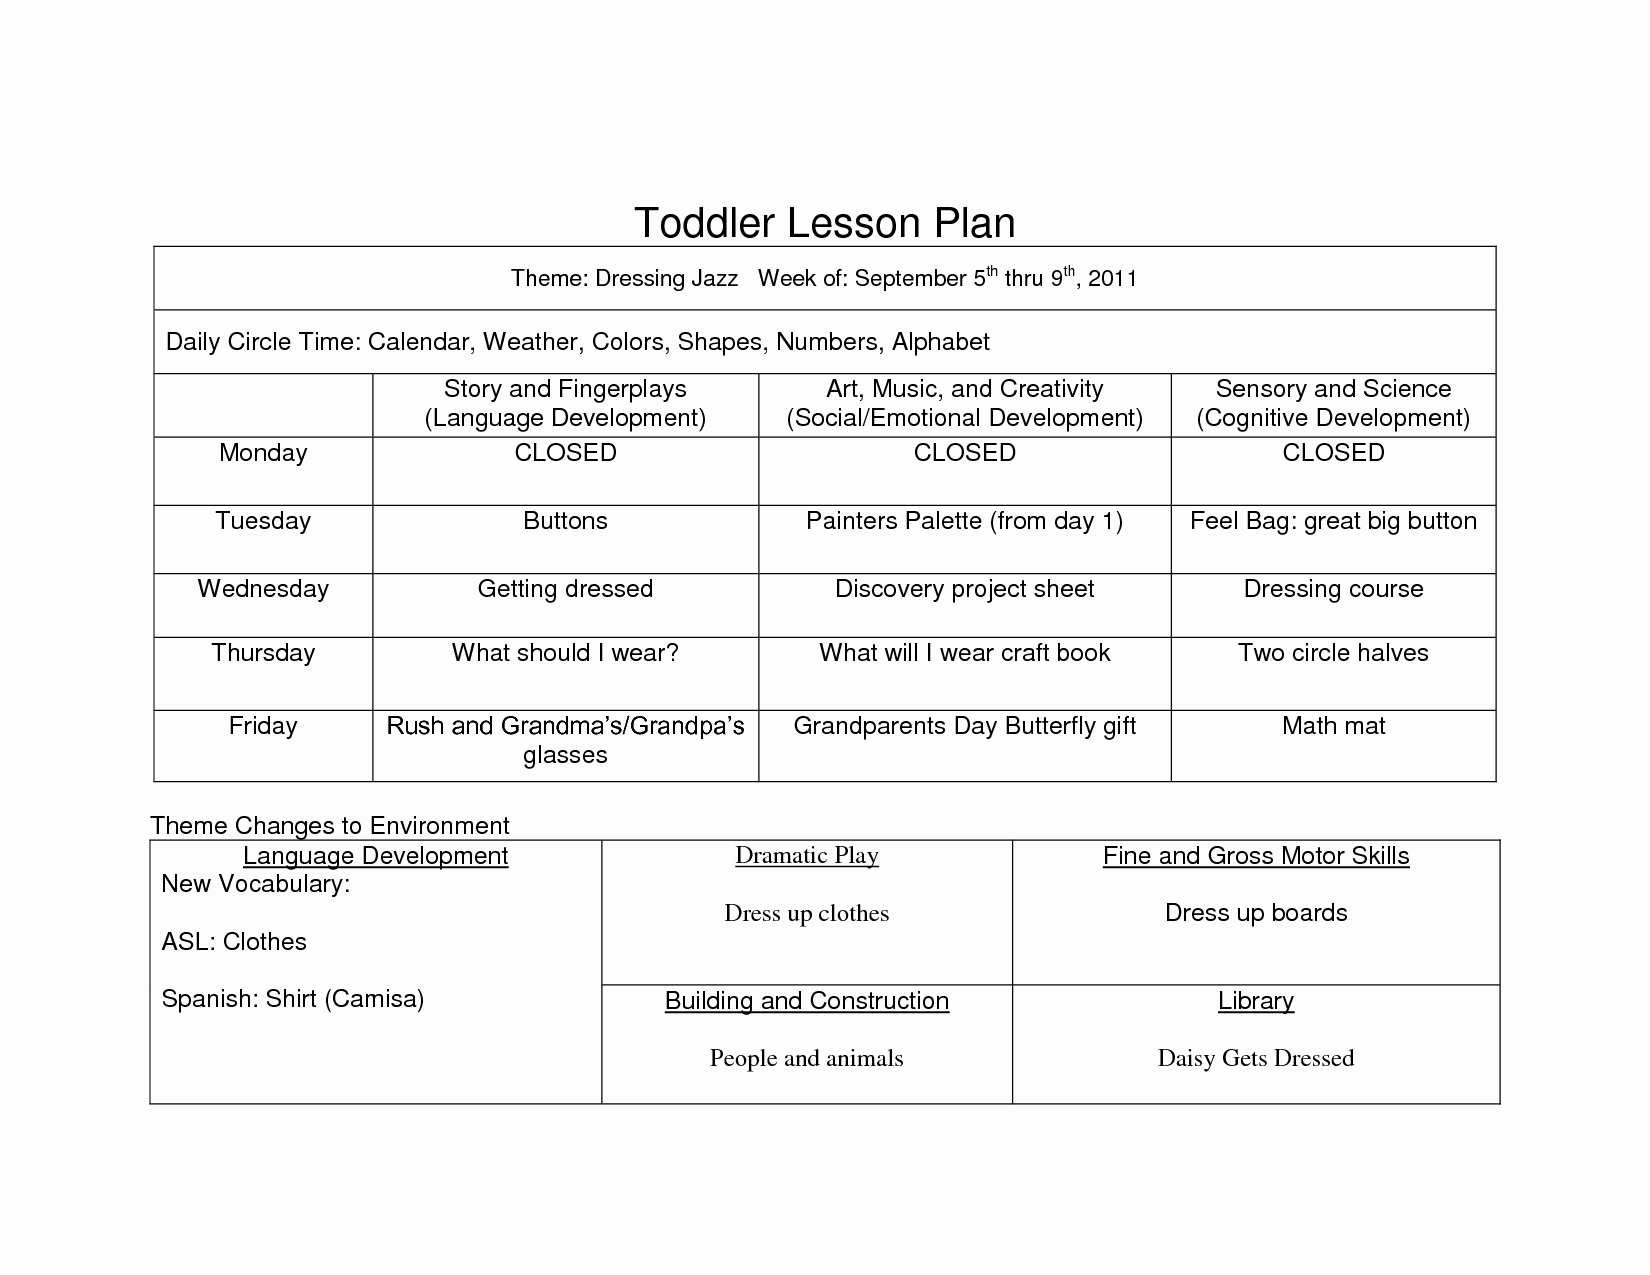 Lesson Plan Template for toddlers Beautiful Preschool Curriculum themes